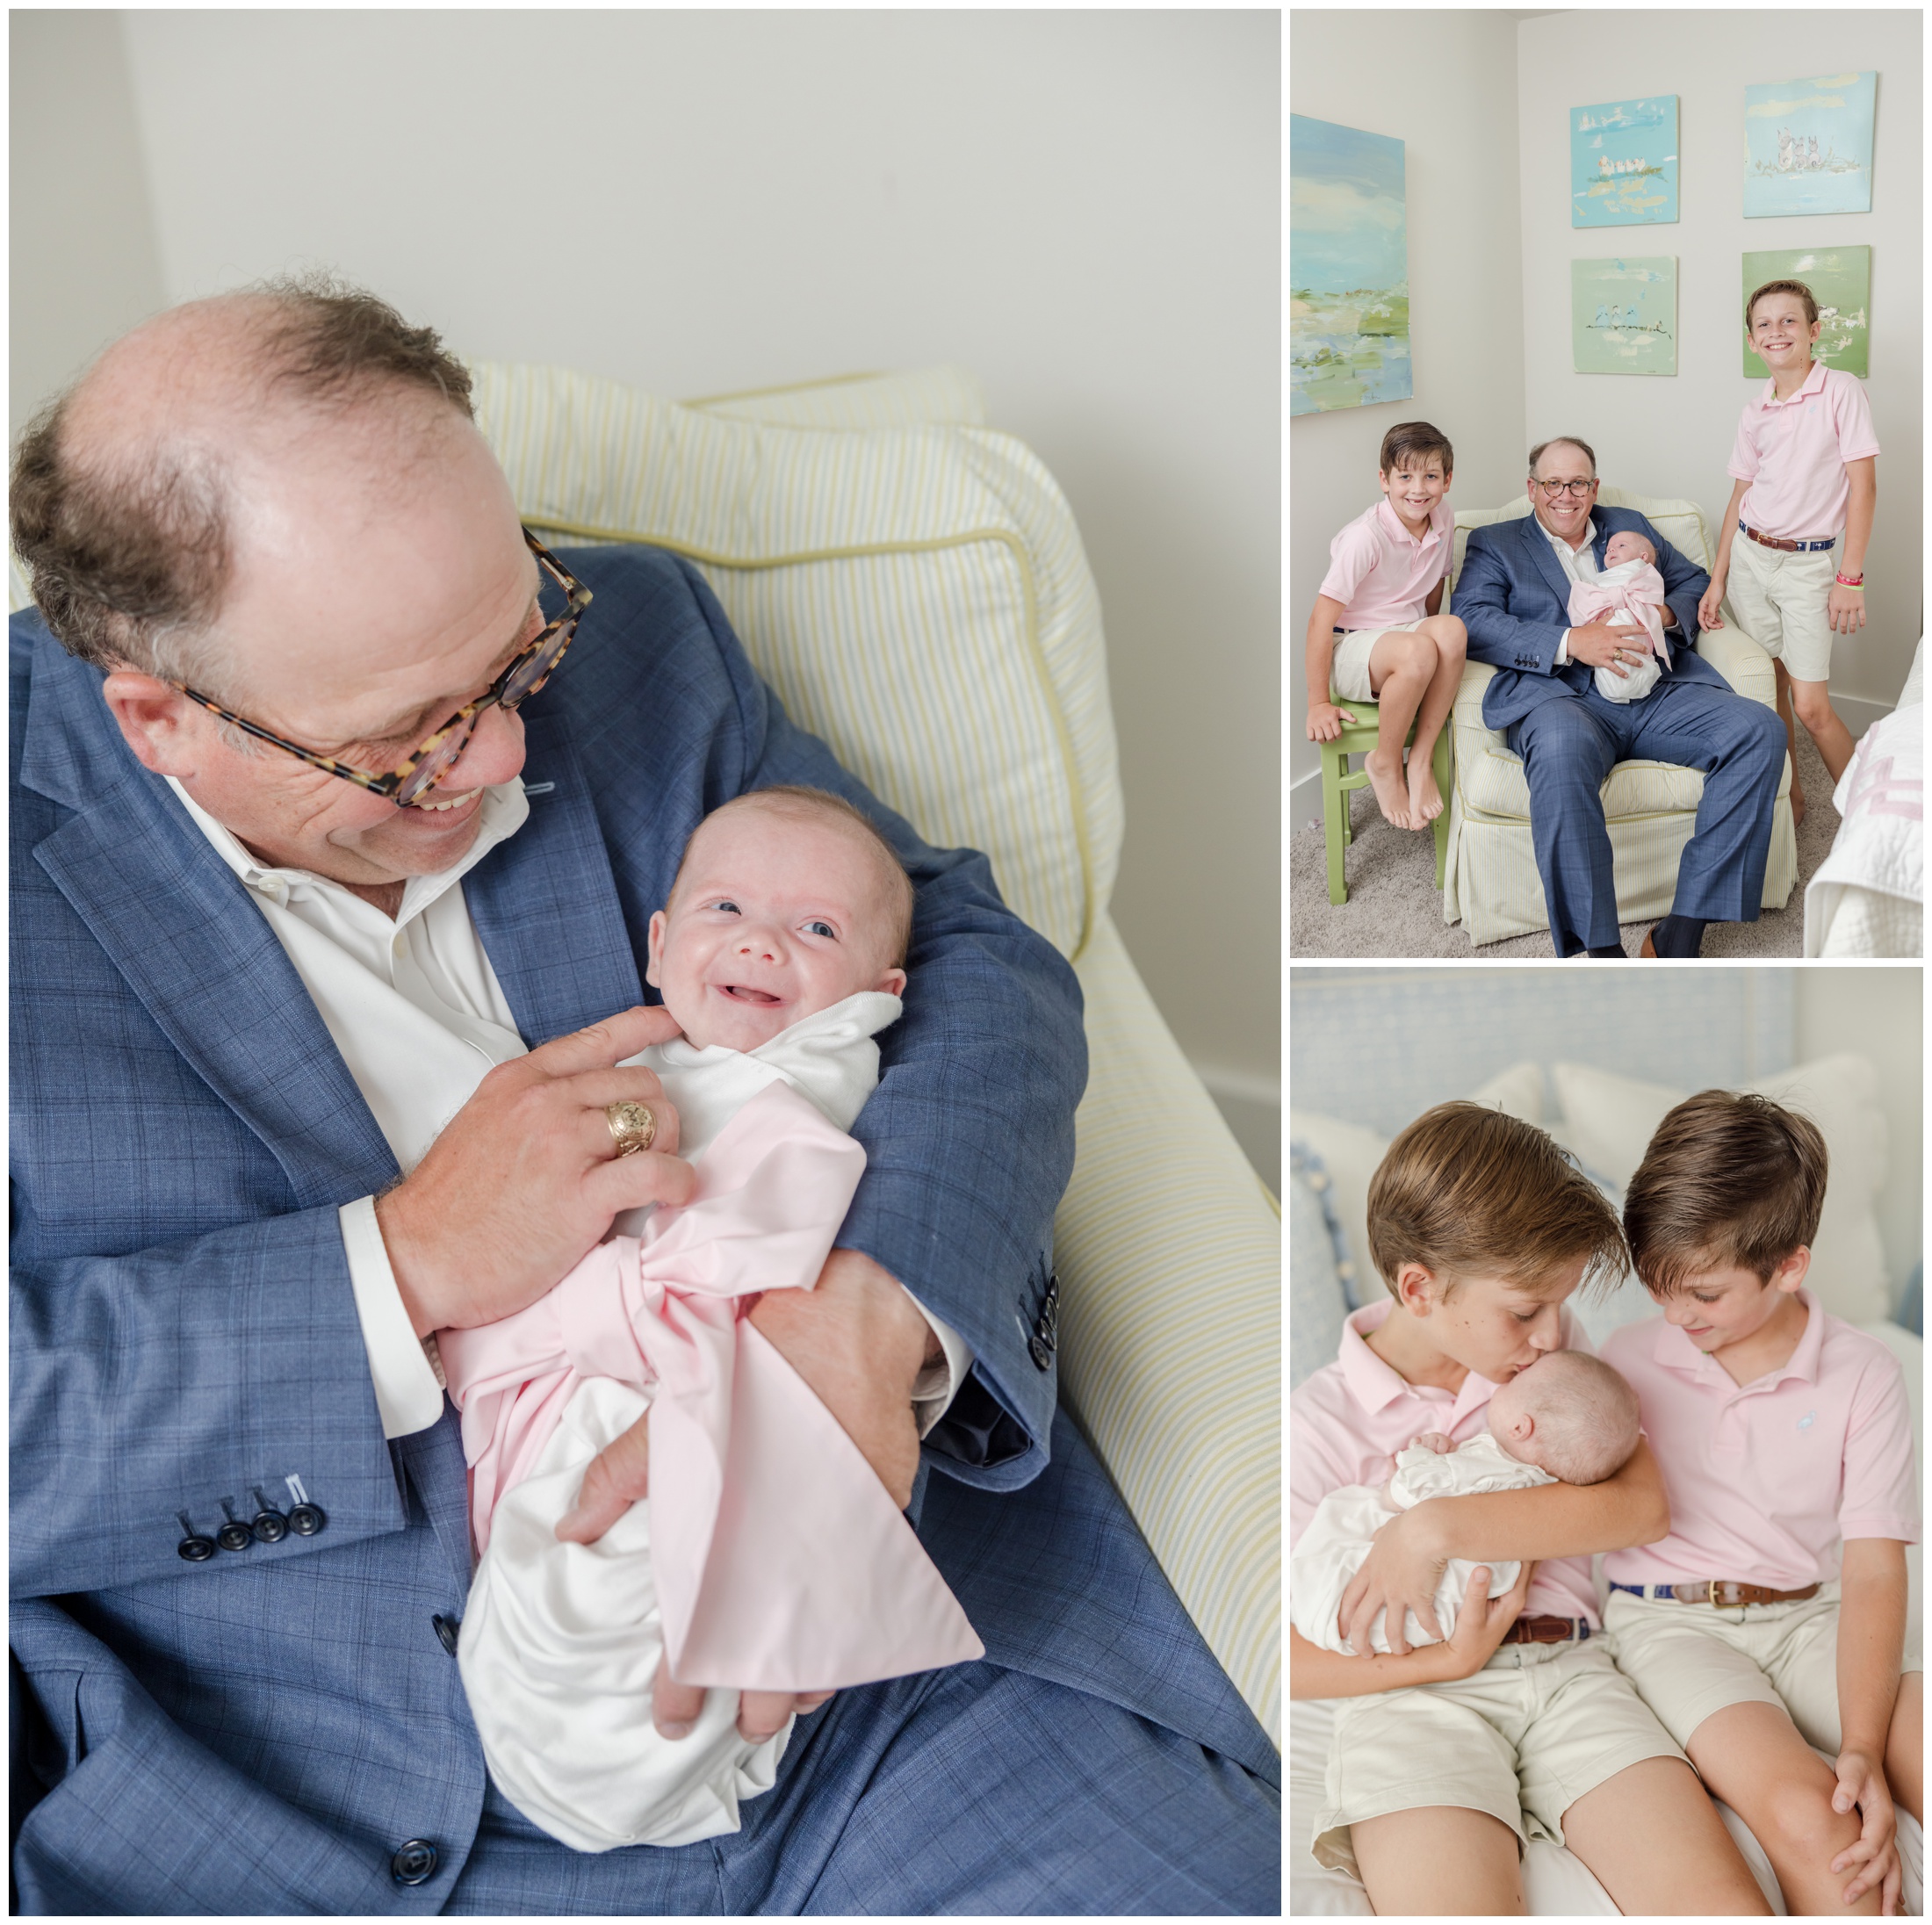 Portraits of a father with his young sons and newborn baby girl smiling for the Greenville photographer.